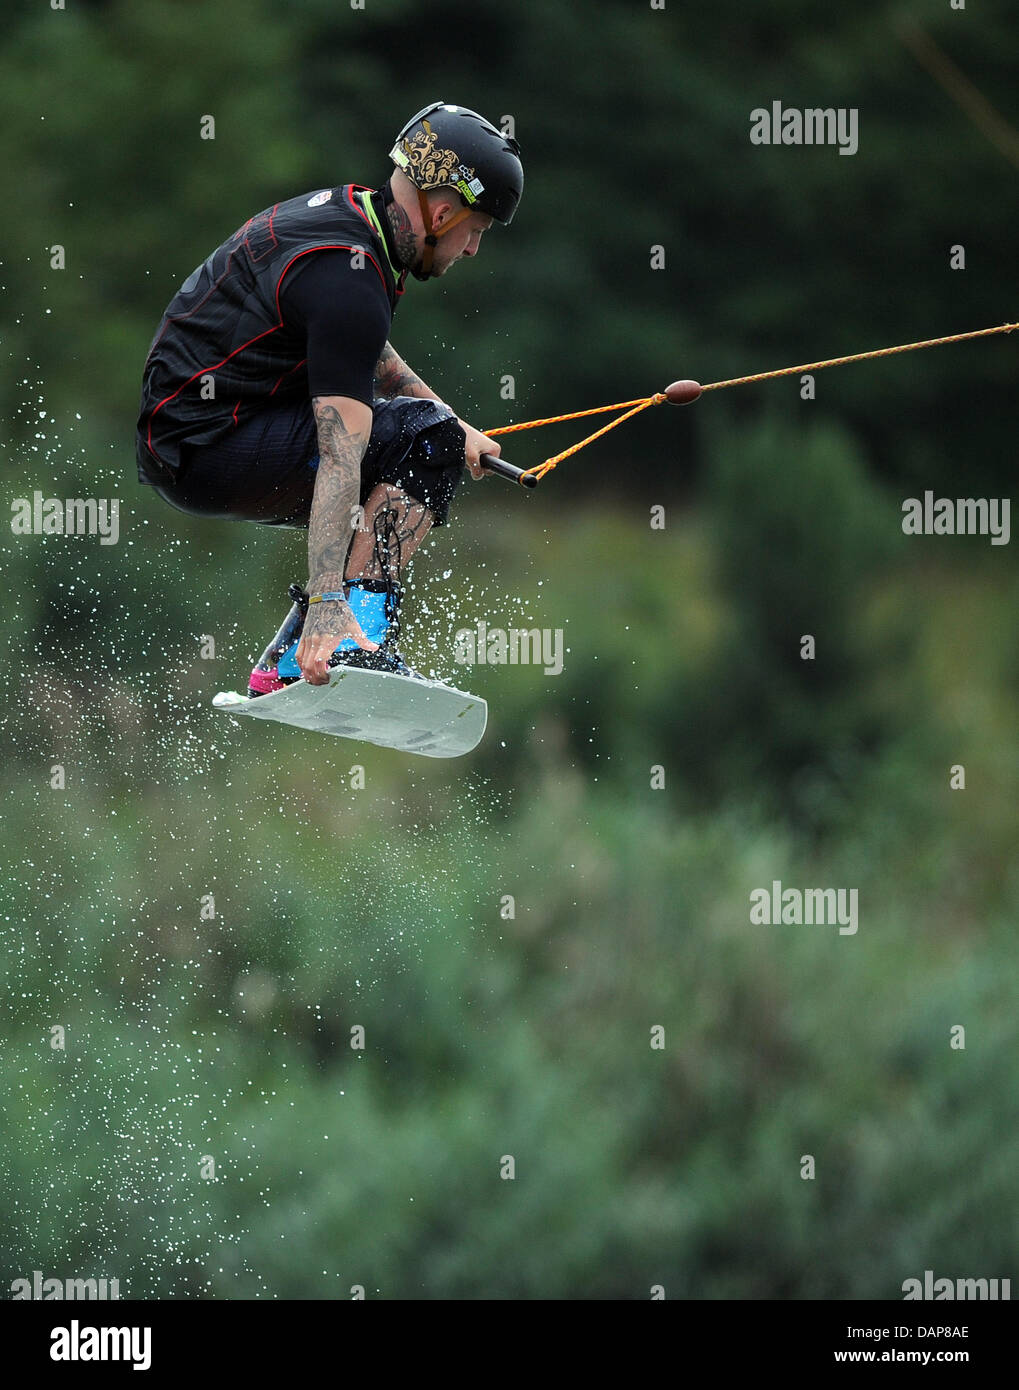 A man jumps during water skiing at the Blue Lake in Hanover Garbsen, Germany, 01 August 2011. Photo: Caroline Seidel Stock Photo